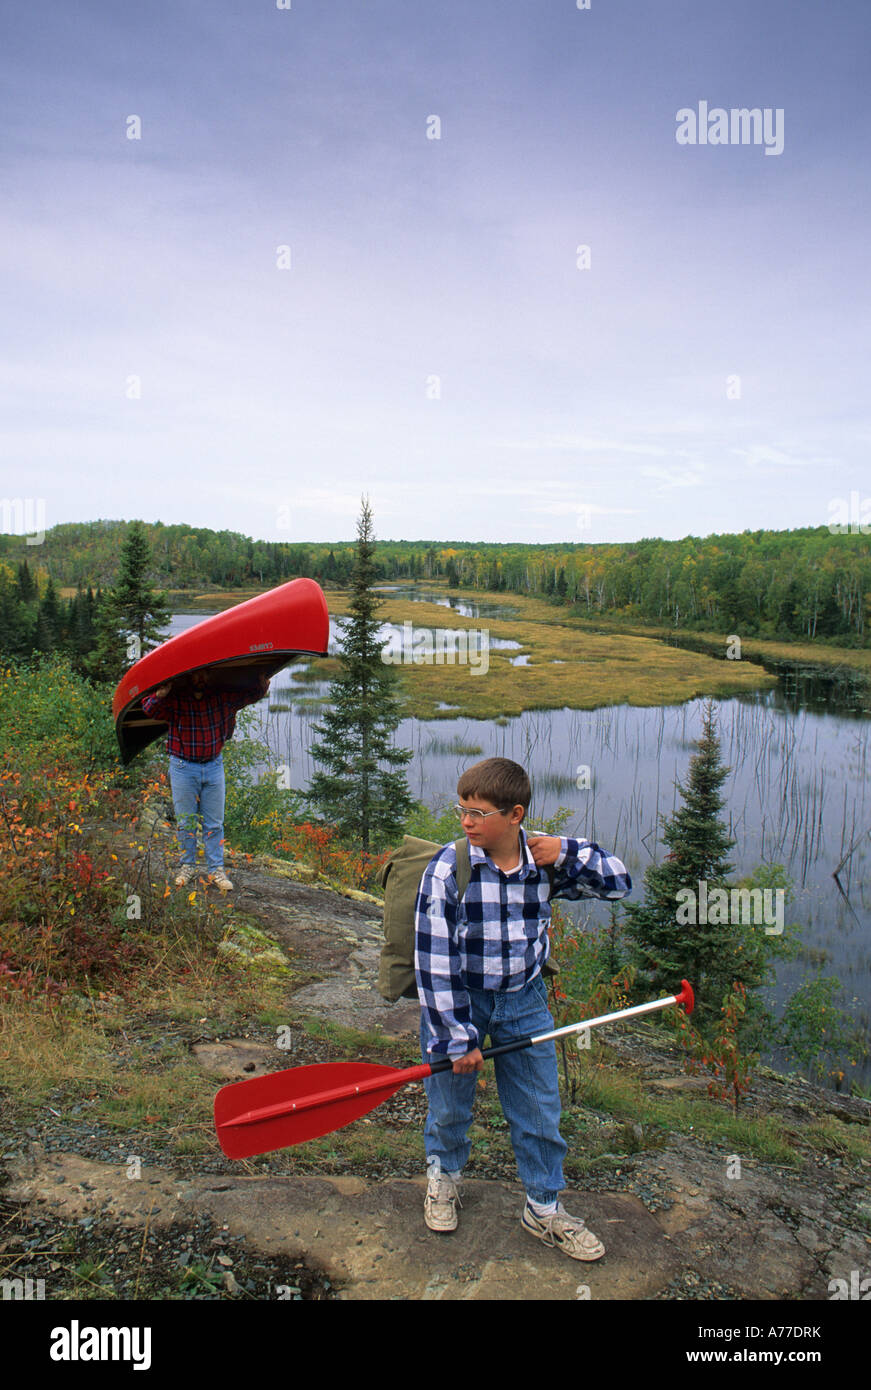 DAD AND SON PORTAGE CANOE NEAR WOOD LAKE IN THE BOUNDARY WATERS CANOE AREA WILDERNESS, NORTHERN MINNESOTA. LATE SUMMER. Stock Photo